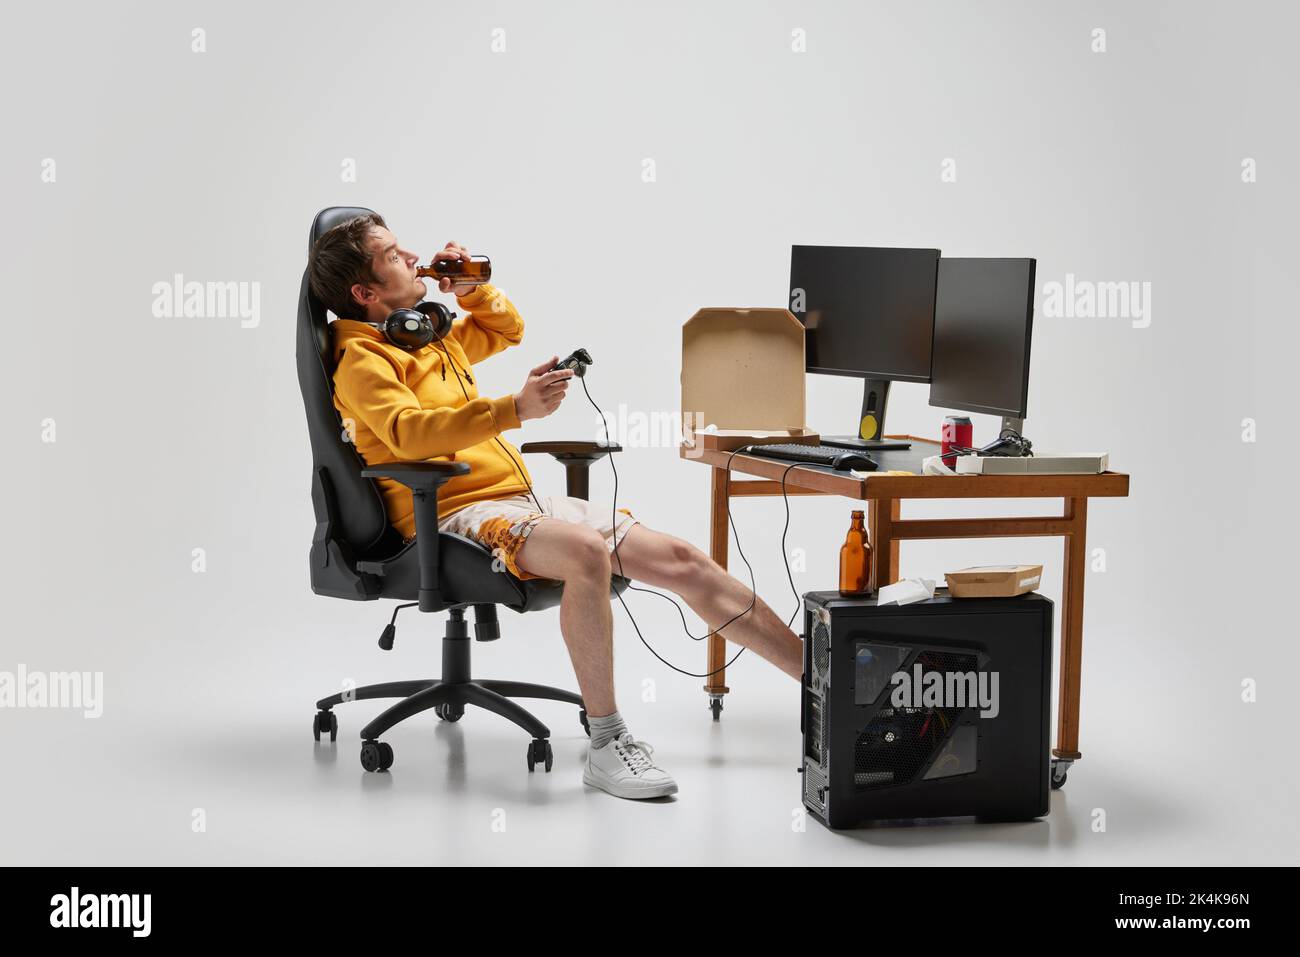 Emotional man, student sitting at home, playing computer games isolated over grey background. Hobby, studying, education, youth, remote workplace Stock Photo